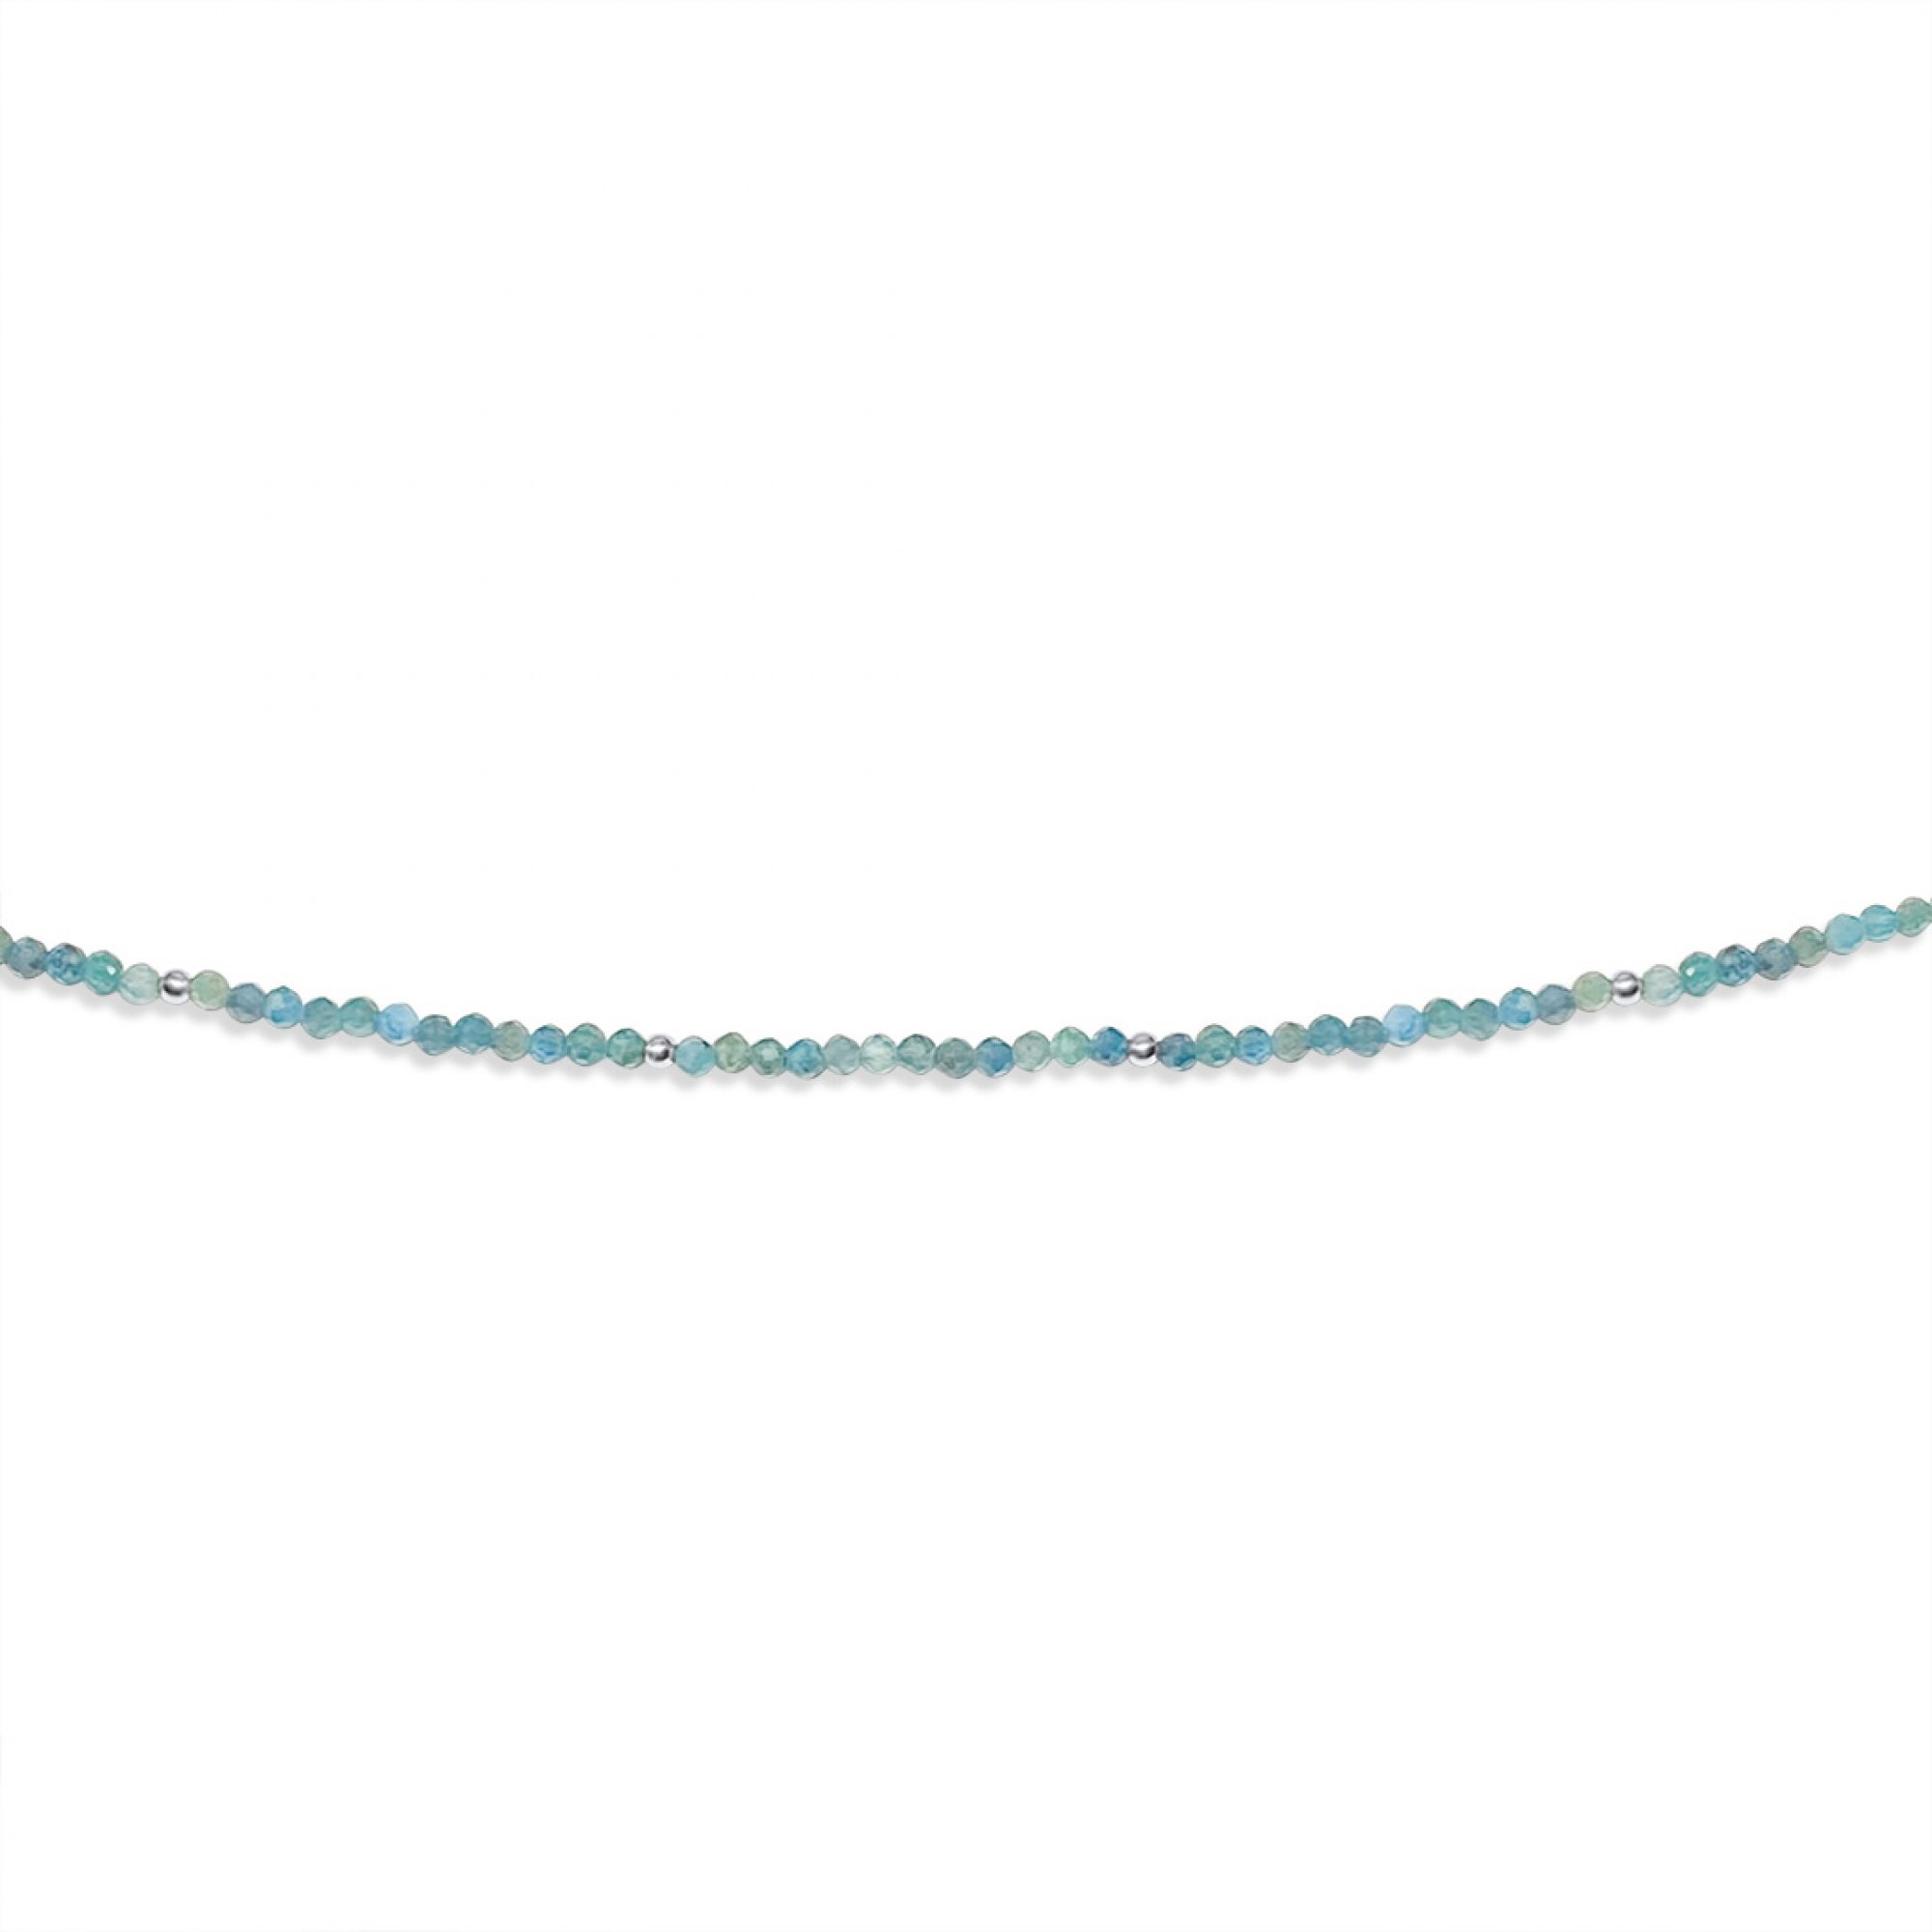 Anklet with apatite beads